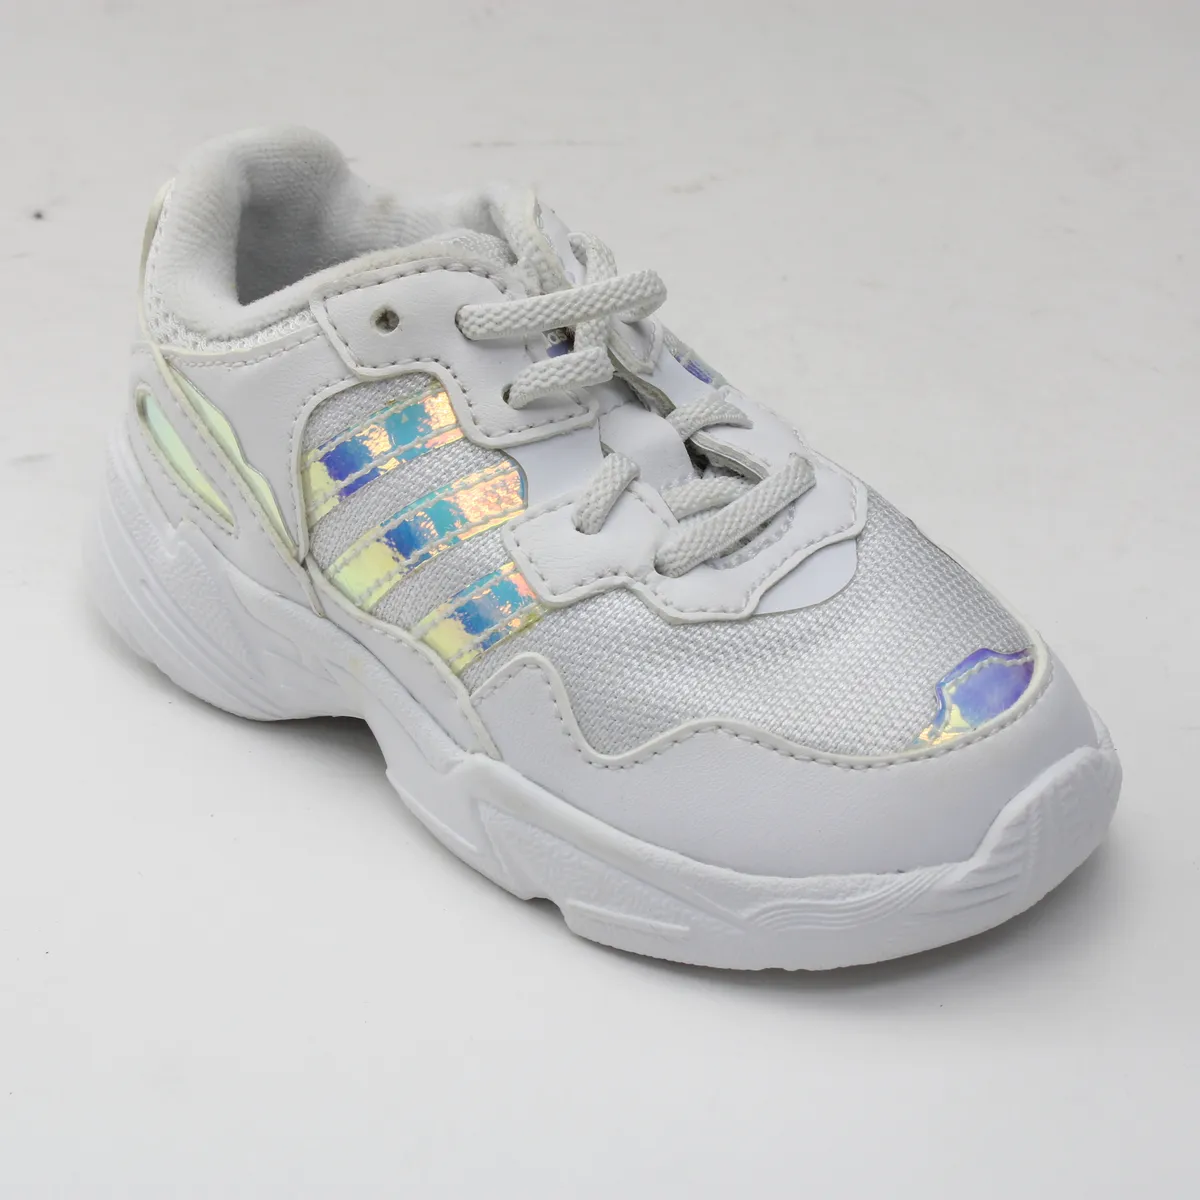 bit Pest Bage adidas Yung-96 El Toddler Boys Size 6 M Sneakers Casual Shoes EE6739 | eBay